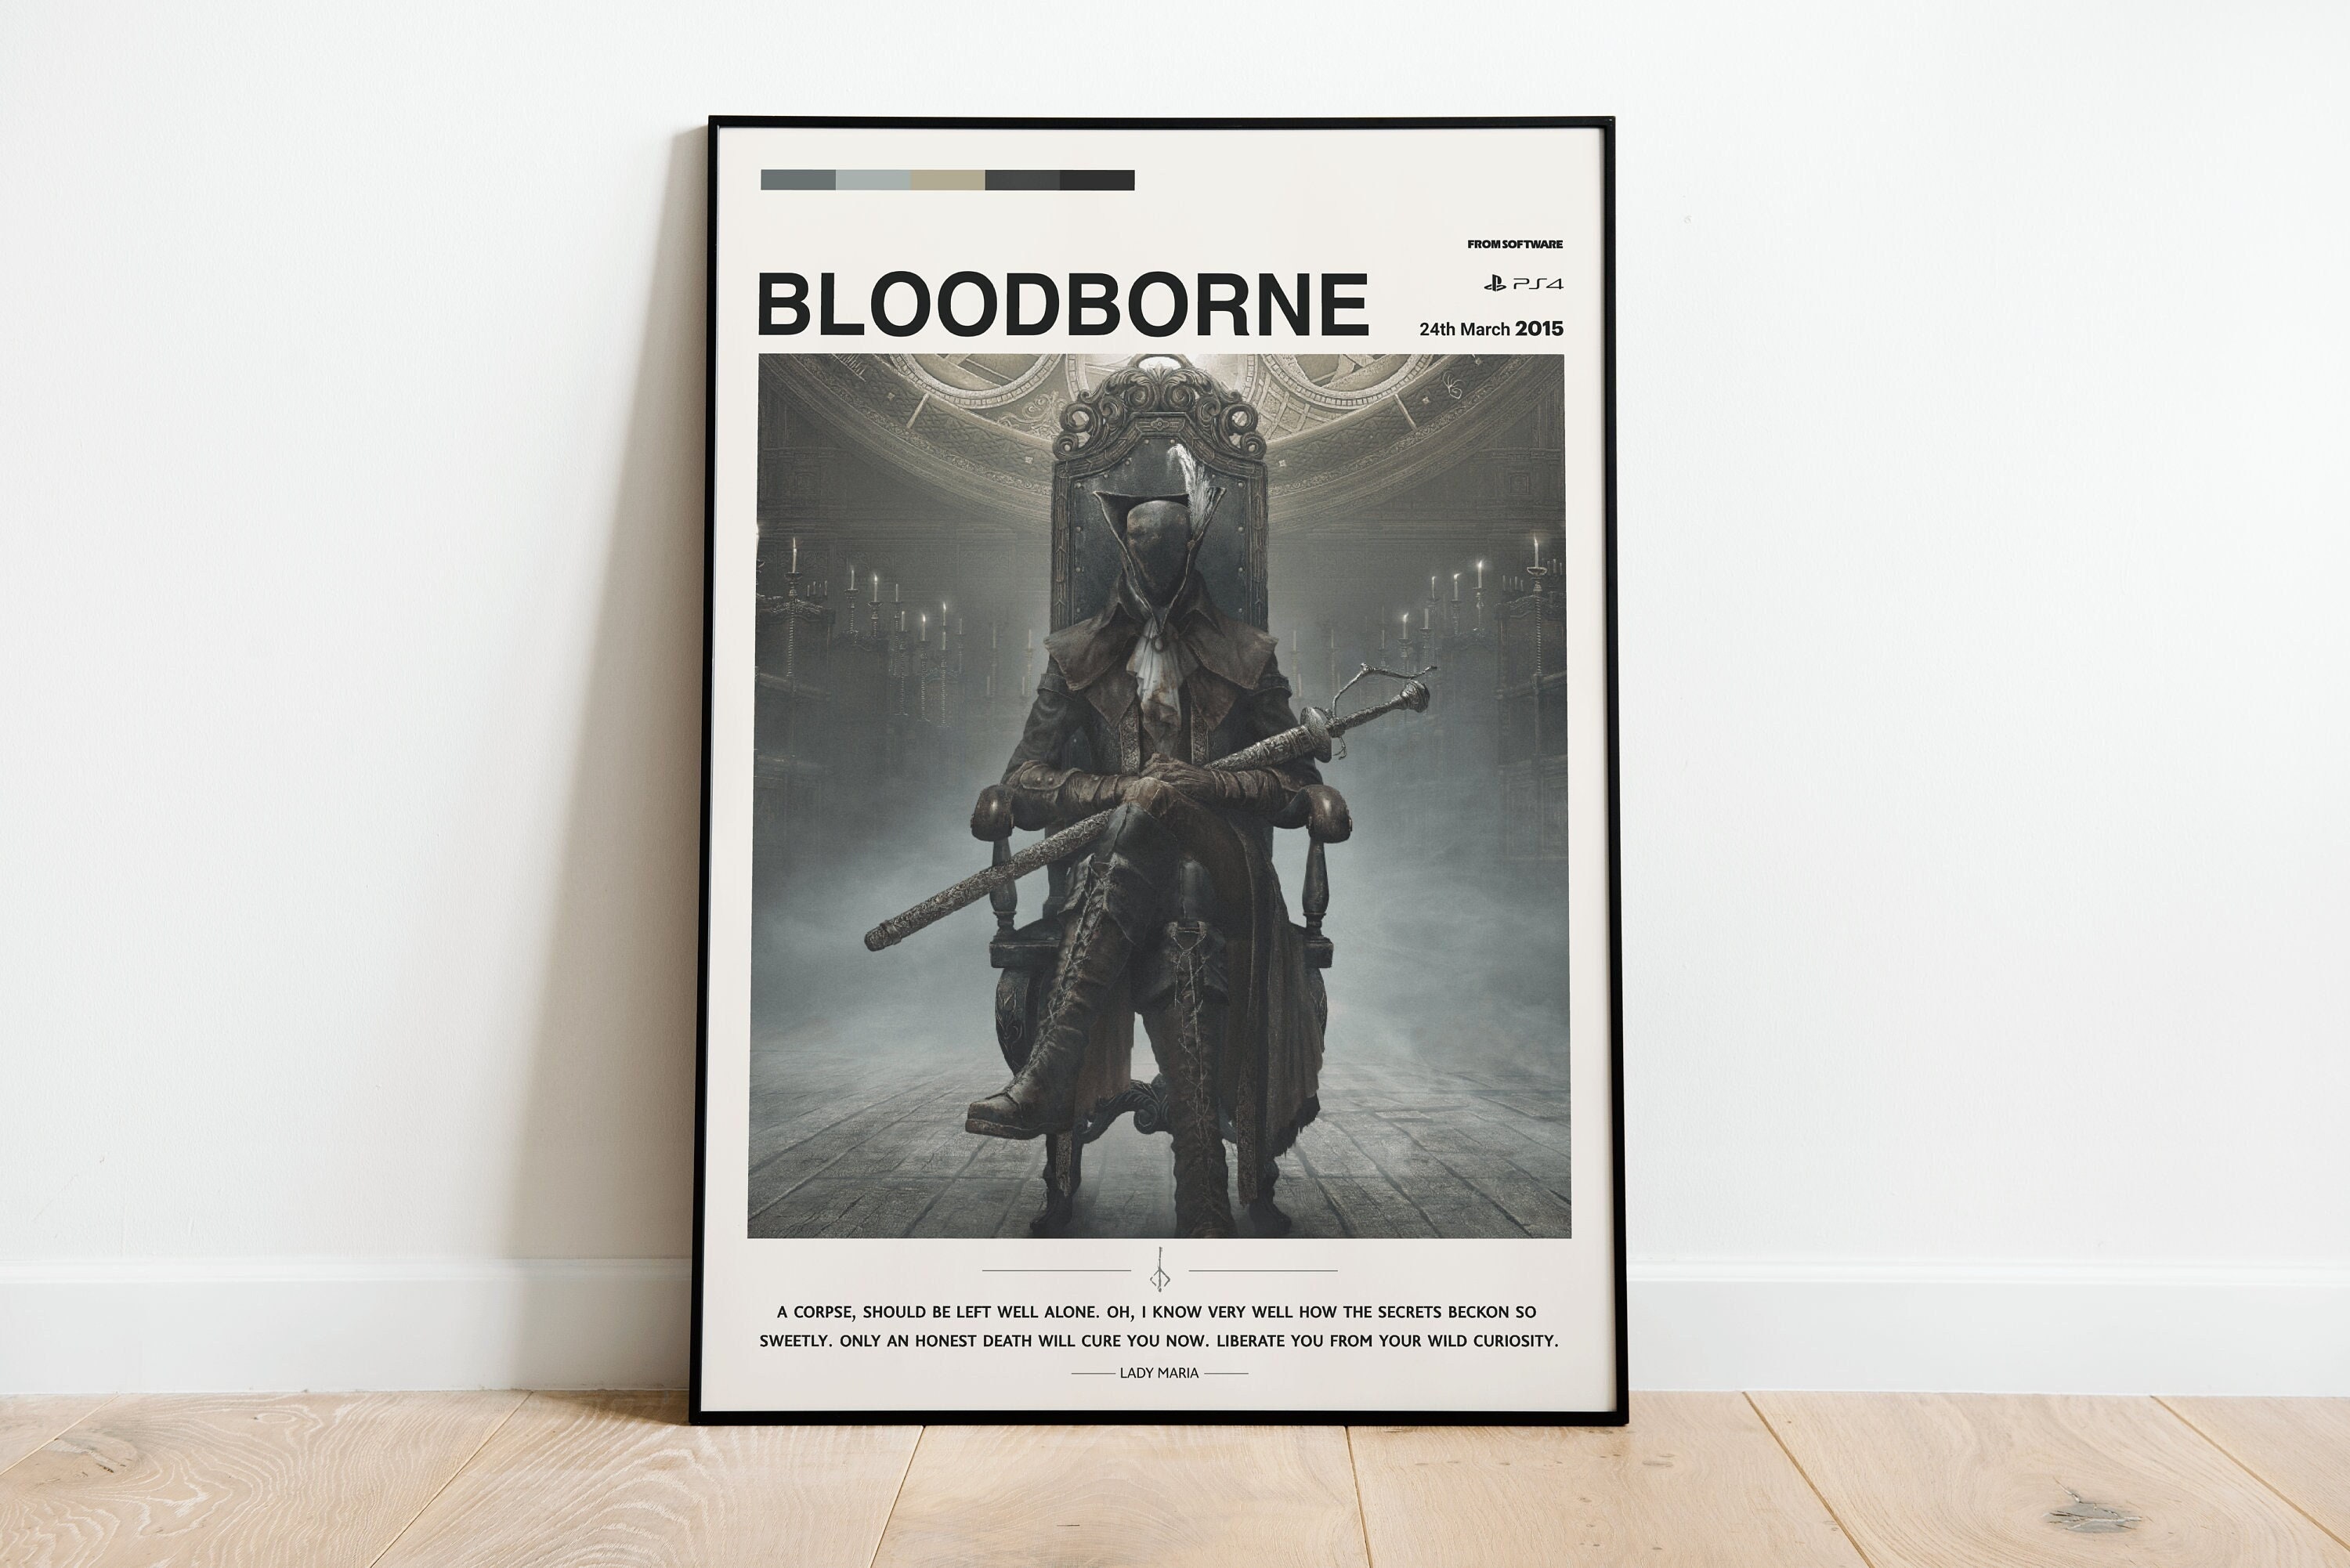 Lady Maria on the featured section on PS4 : r/bloodborne